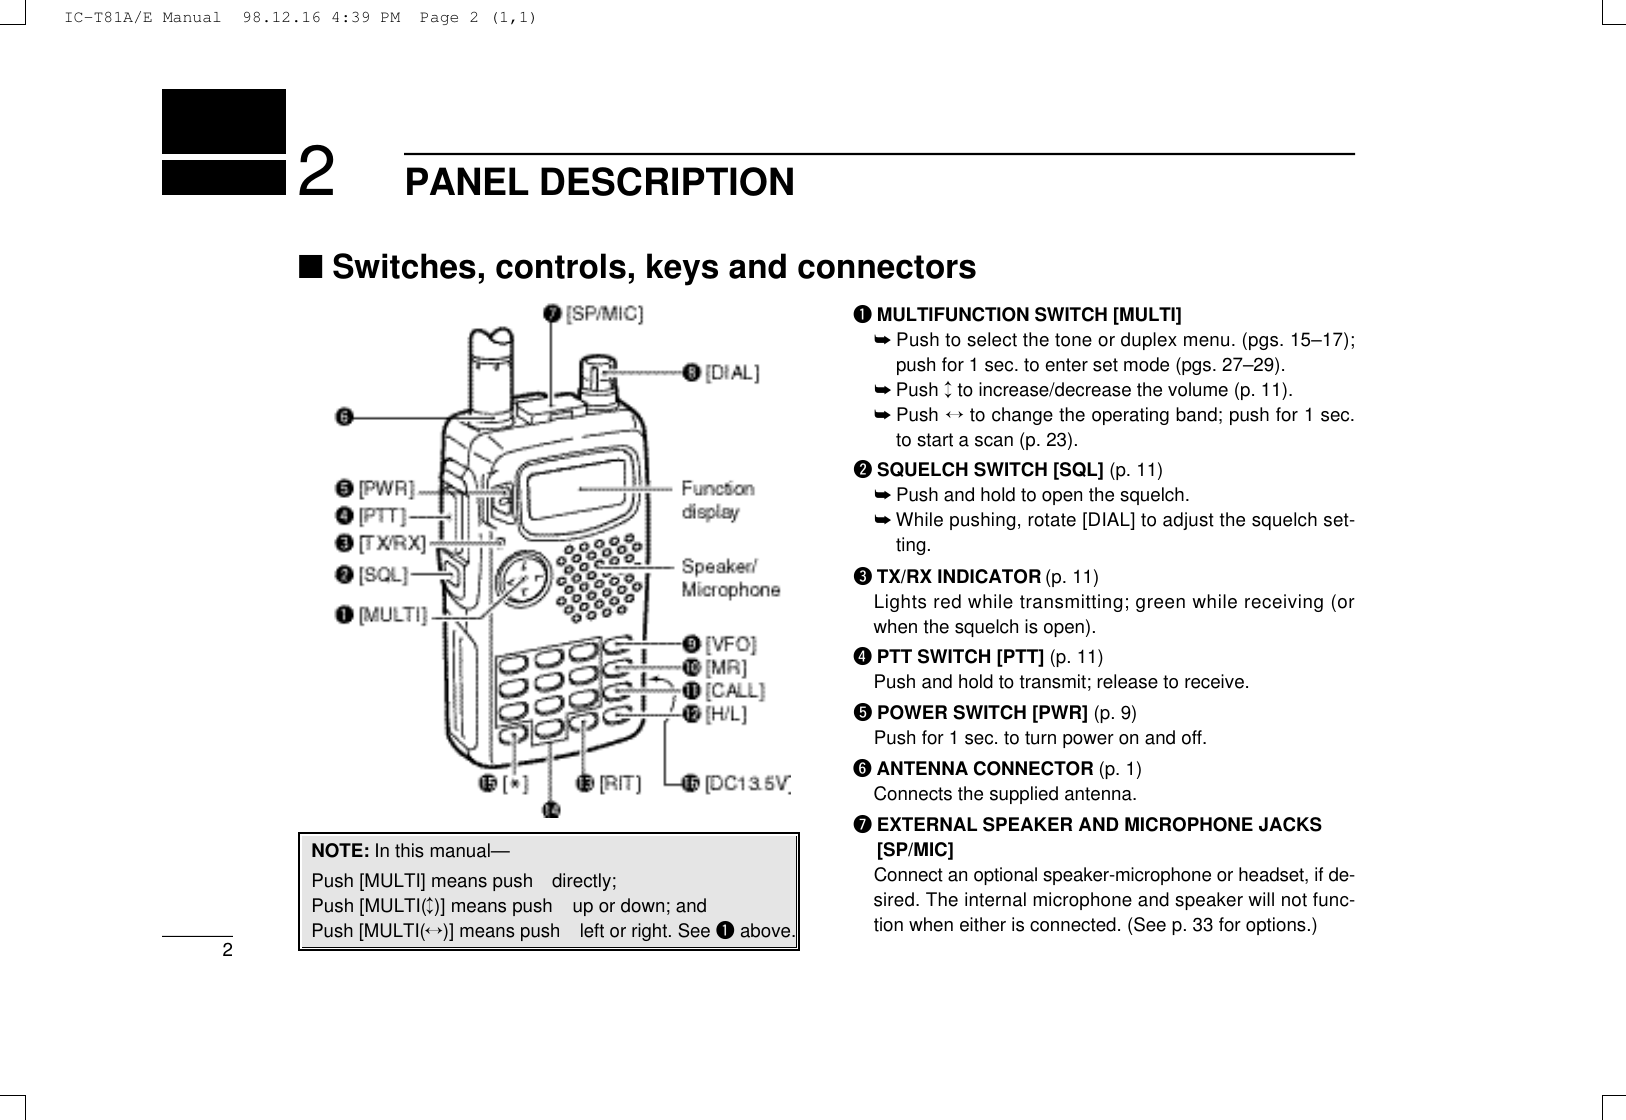 PANEL DESCRIPTION22qMULTIFUNCTION SWITCH [MULTI]➥Push to select the tone or duplex menu. (pgs. 15–17);push for 1 sec. to enter set mode (pgs. 27–29).➥Push ↕to increase/decrease the volume (p. 11).➥Push ↔to change the operating band; push for 1 sec.to start a scan (p. 23).wSQUELCH SWITCH [SQL] (p. 11)➥Push and hold to open the squelch.➥While pushing, rotate [DIAL] to adjust the squelch set-ting.eTX/RX INDICATOR (p. 11)Lights red while transmitting; green while receiving (orwhen the squelch is open).rPTT SWITCH [PTT] (p. 11)Push and hold to transmit; release to receive.tPOWER SWITCH [PWR] (p. 9)Push for 1 sec. to turn power on and off.yANTENNA CONNECTOR (p. 1)Connects the supplied antenna.uEXTERNAL SPEAKER AND MICROPHONE JACKS[SP/MIC]Connect an optional speaker-microphone or headset, if de-sired. The internal microphone and speaker will not func-tion when either is connected. (See p. 33 for options.)■Switches, controls, keys and connectorsNOTE: In this manual—Push [MULTI] means push directly;Push [MULTI(↕)] means push up or down; andPush [MULTI(↔)] means push left or right. See qabove.IC-T81A/E Manual  98.12.16 4:39 PM  Page 2 (1,1)